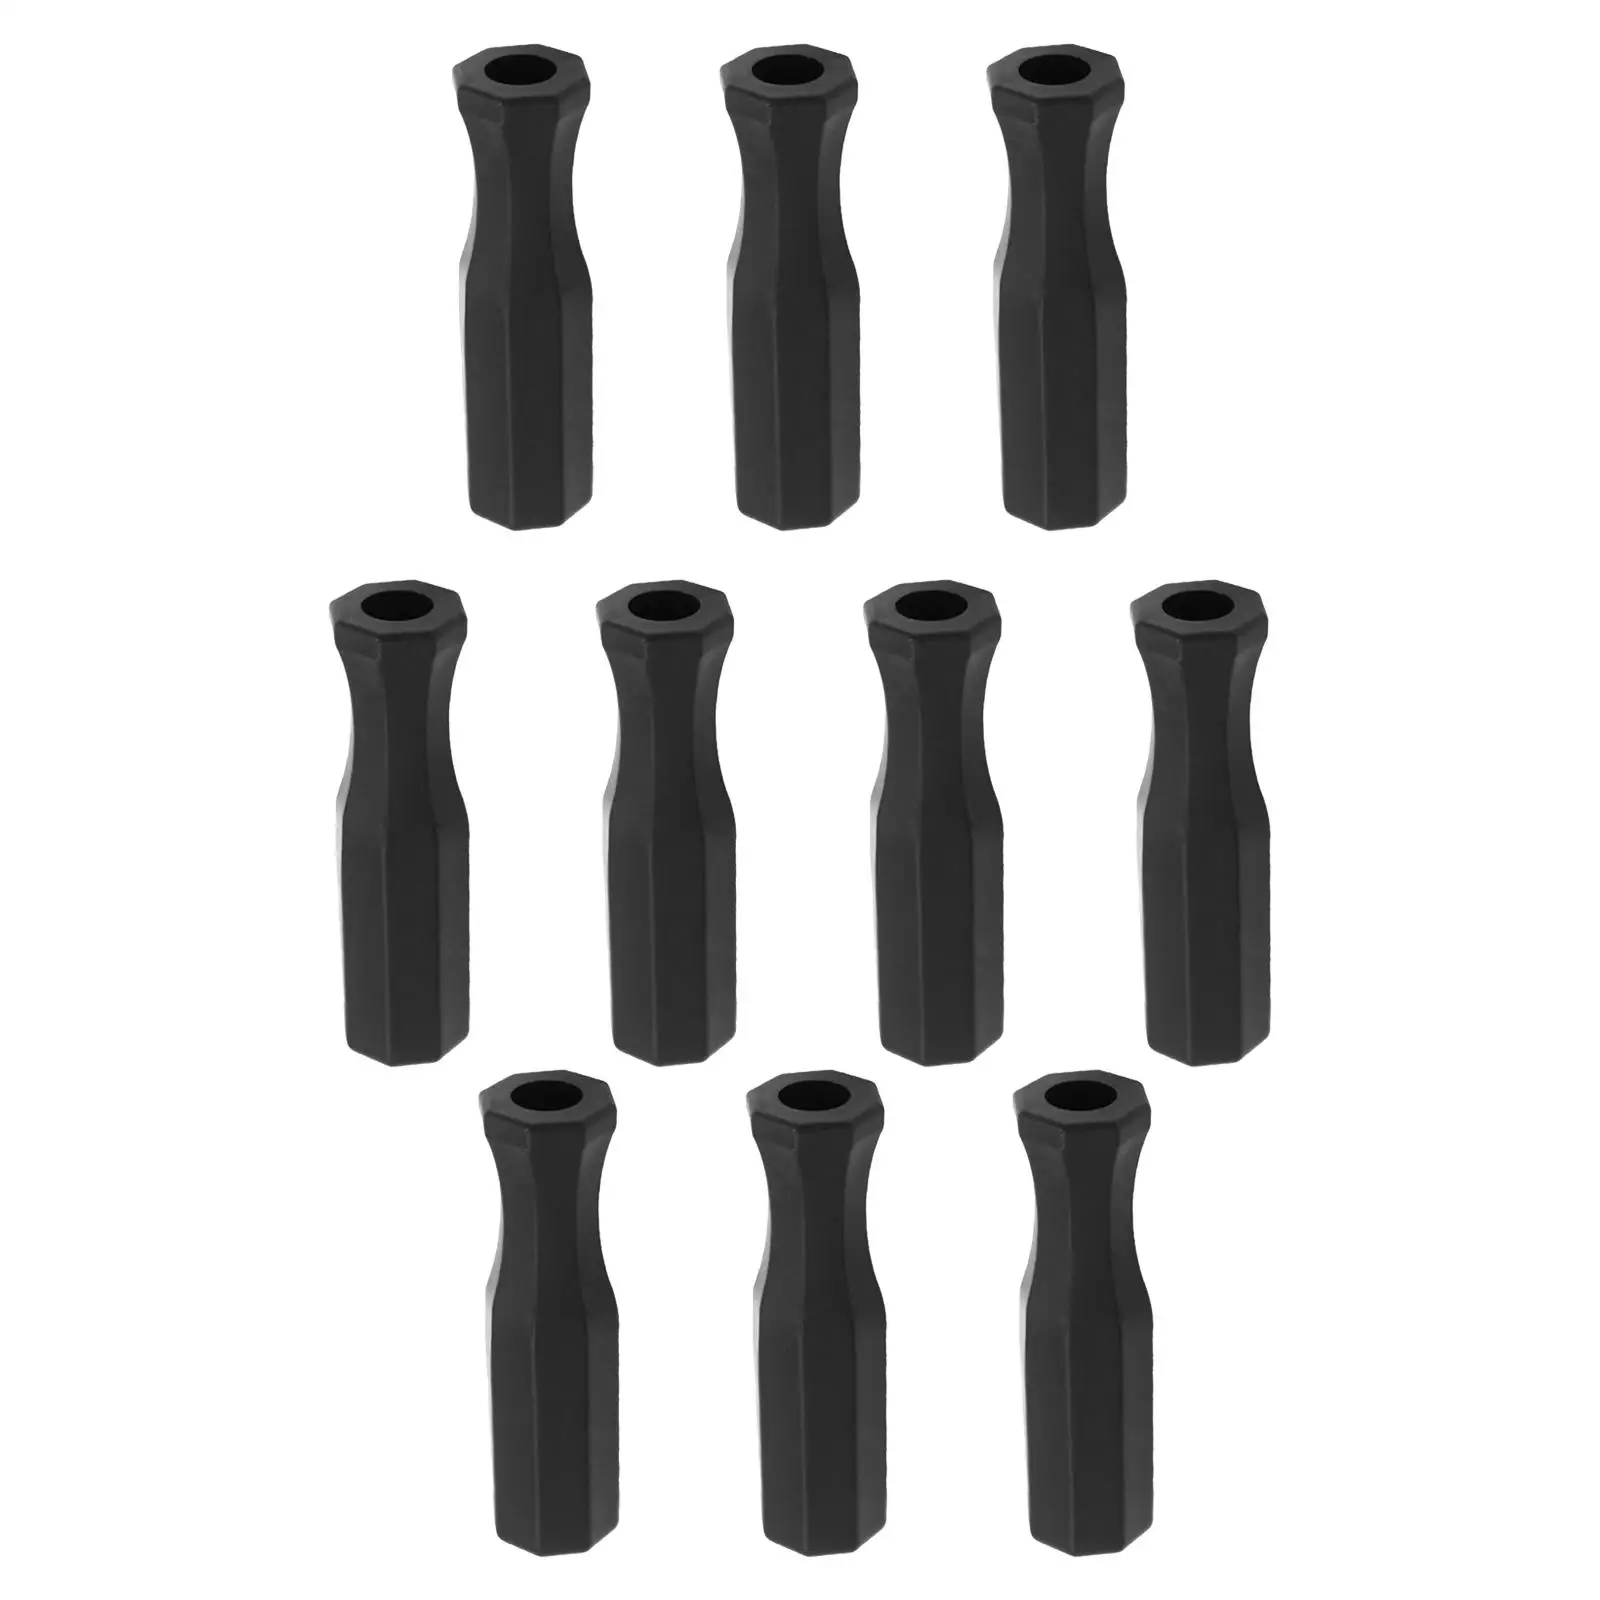 10Pcs Foosball Handle Grips for Standard Foosball Tables Replacement Handles